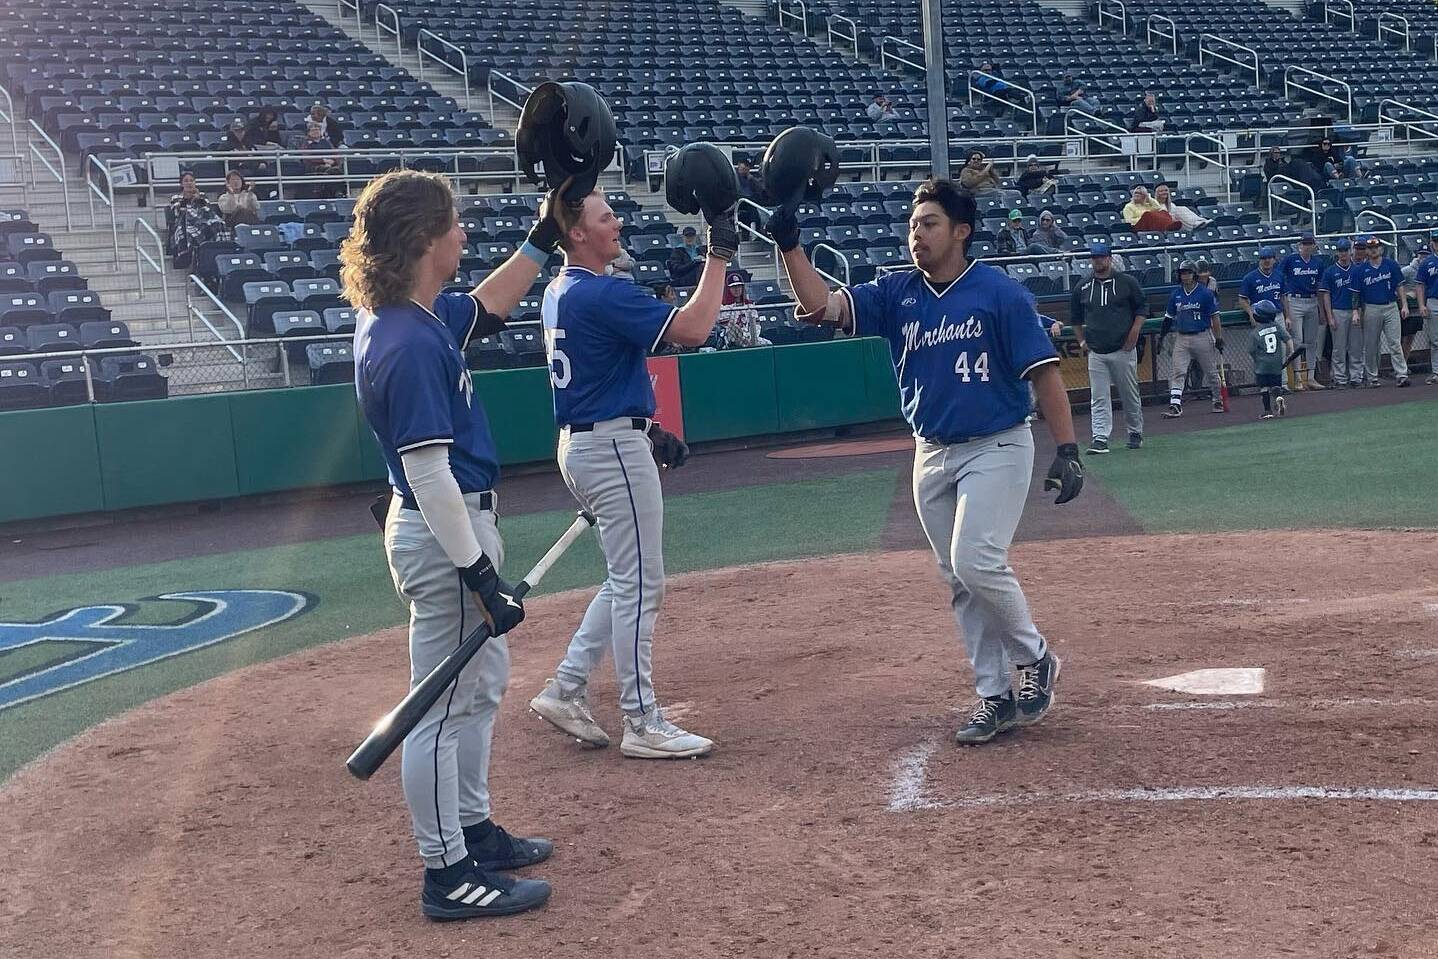 The Everett Merchants’ Aaron Barber, who is returning this season, is greeted by teammates at home plate. (Photo courtesy of the Everett Merchants).